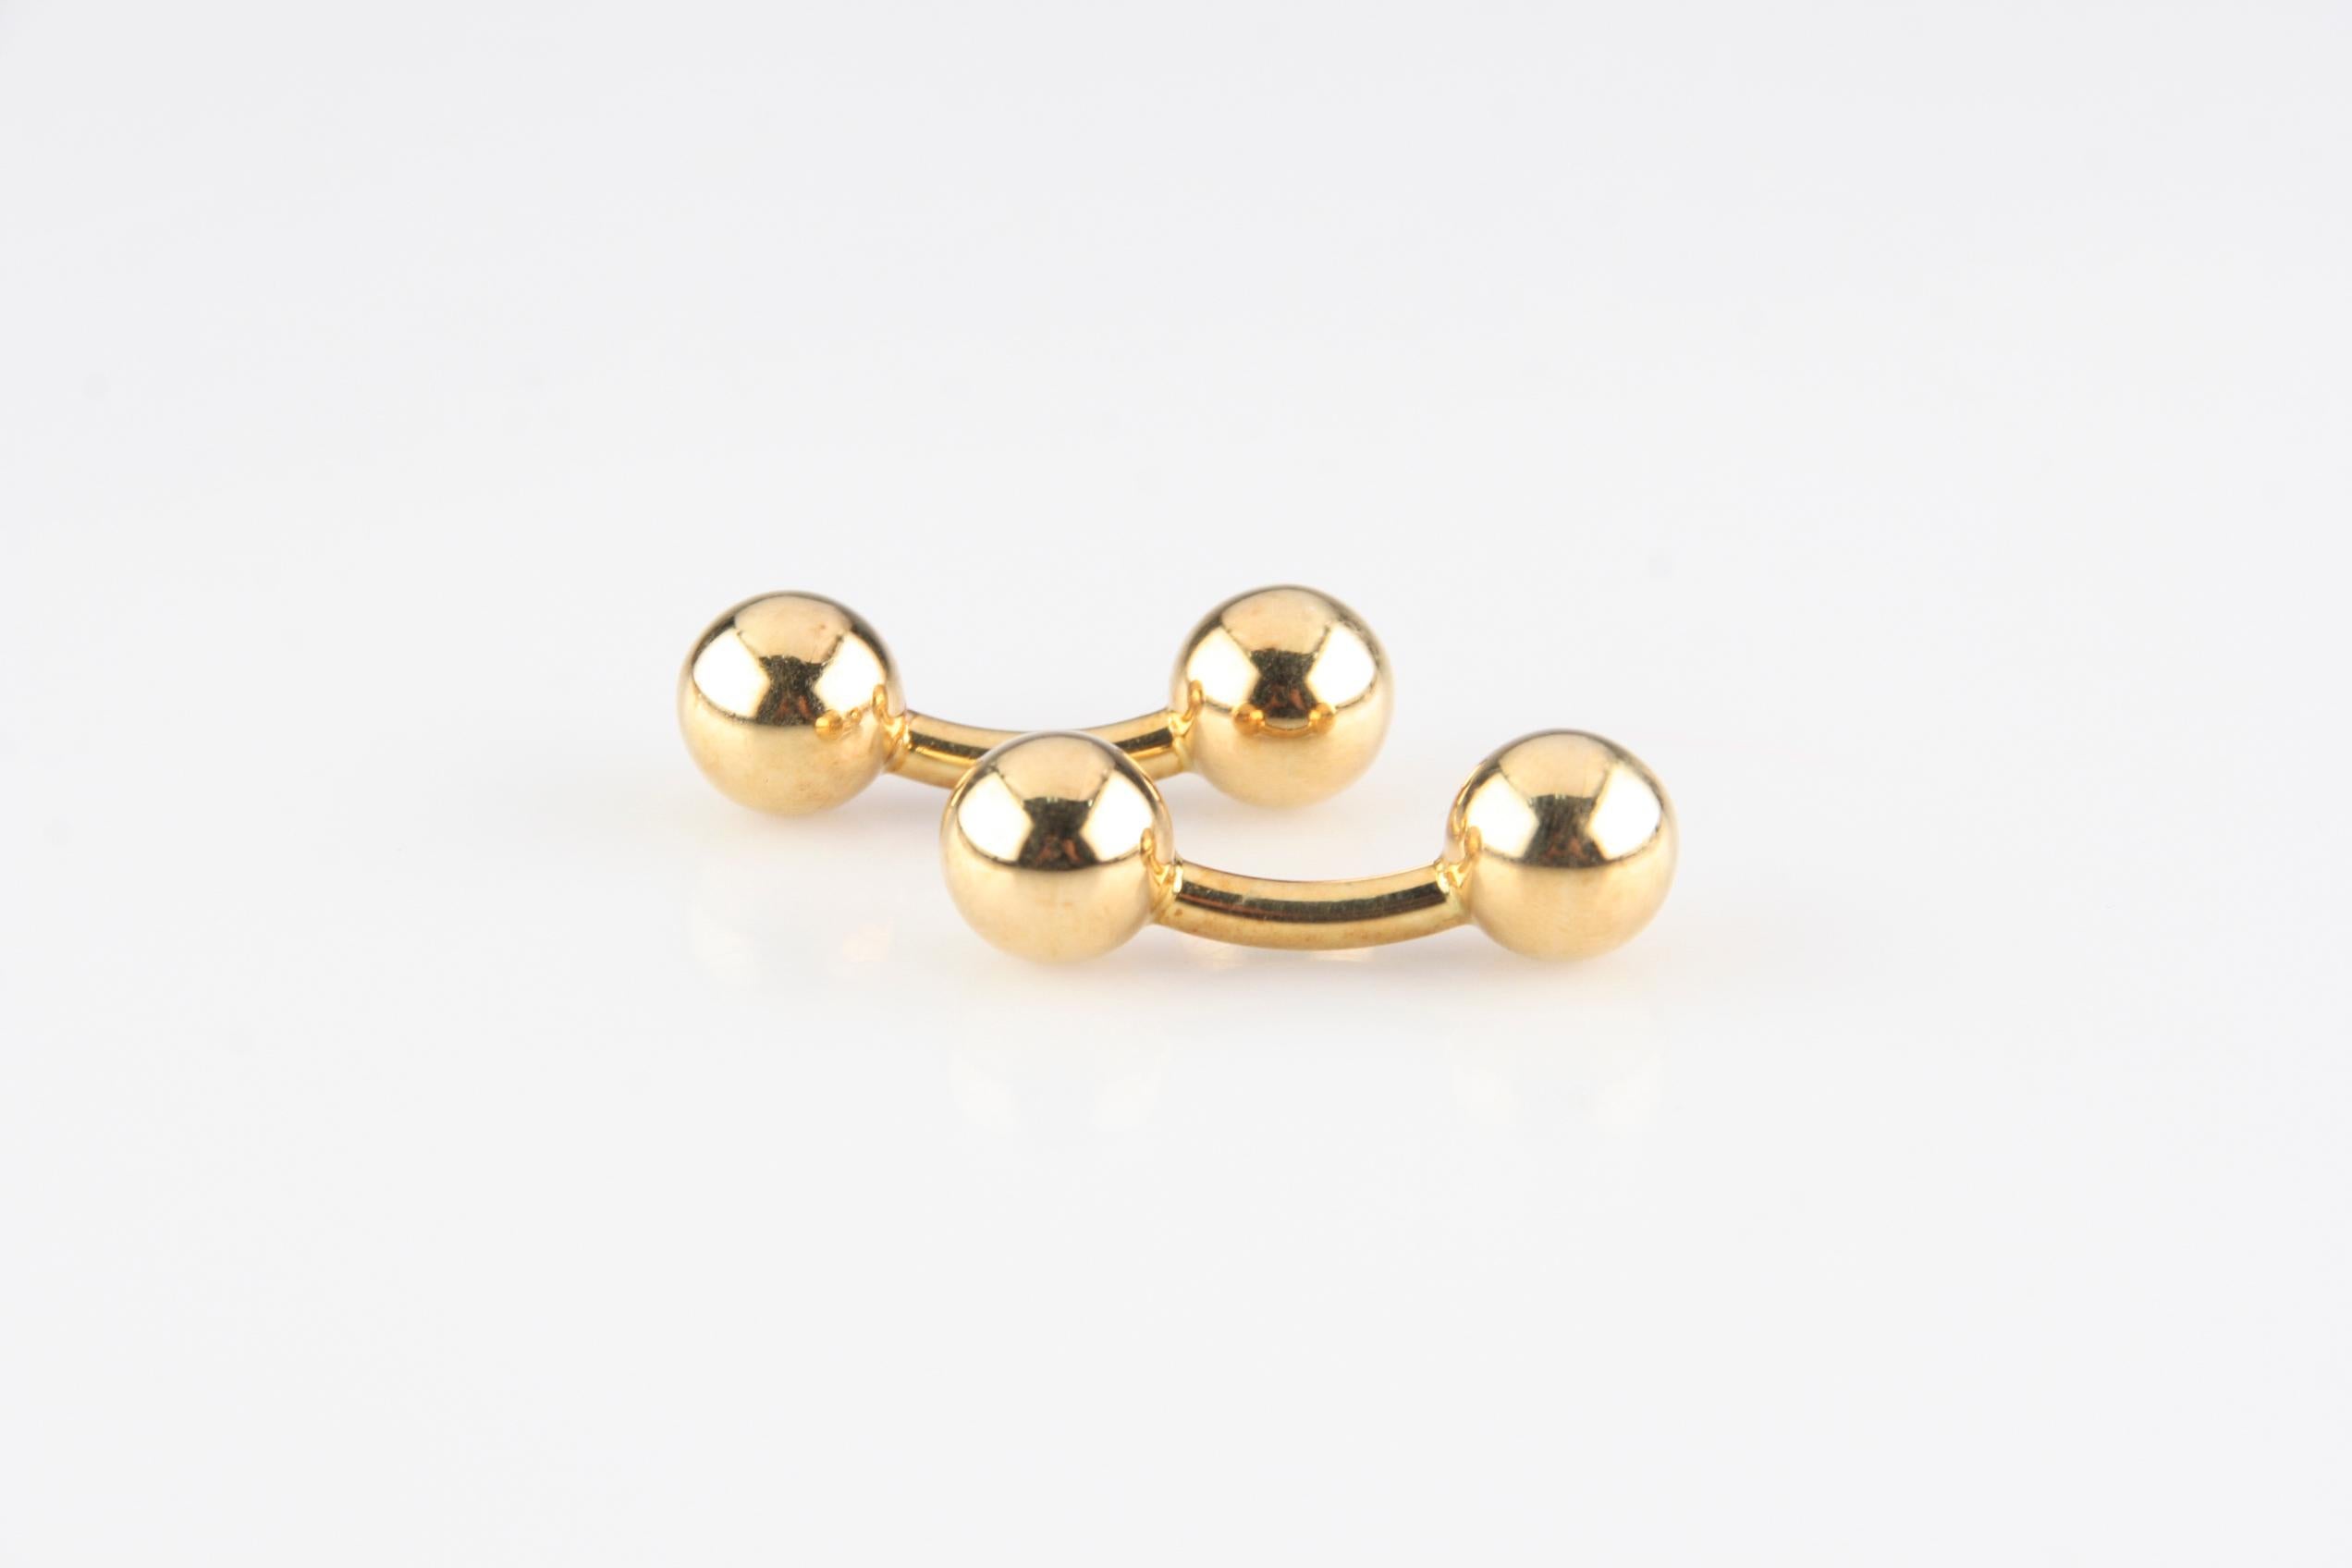 Gorgeous 18k Yellow Gold Cufflinks
Feature 8 mm Round Barbells on Curved Stem
Length of Cufflink = 28 mm
Total Mass = 8.1 grams